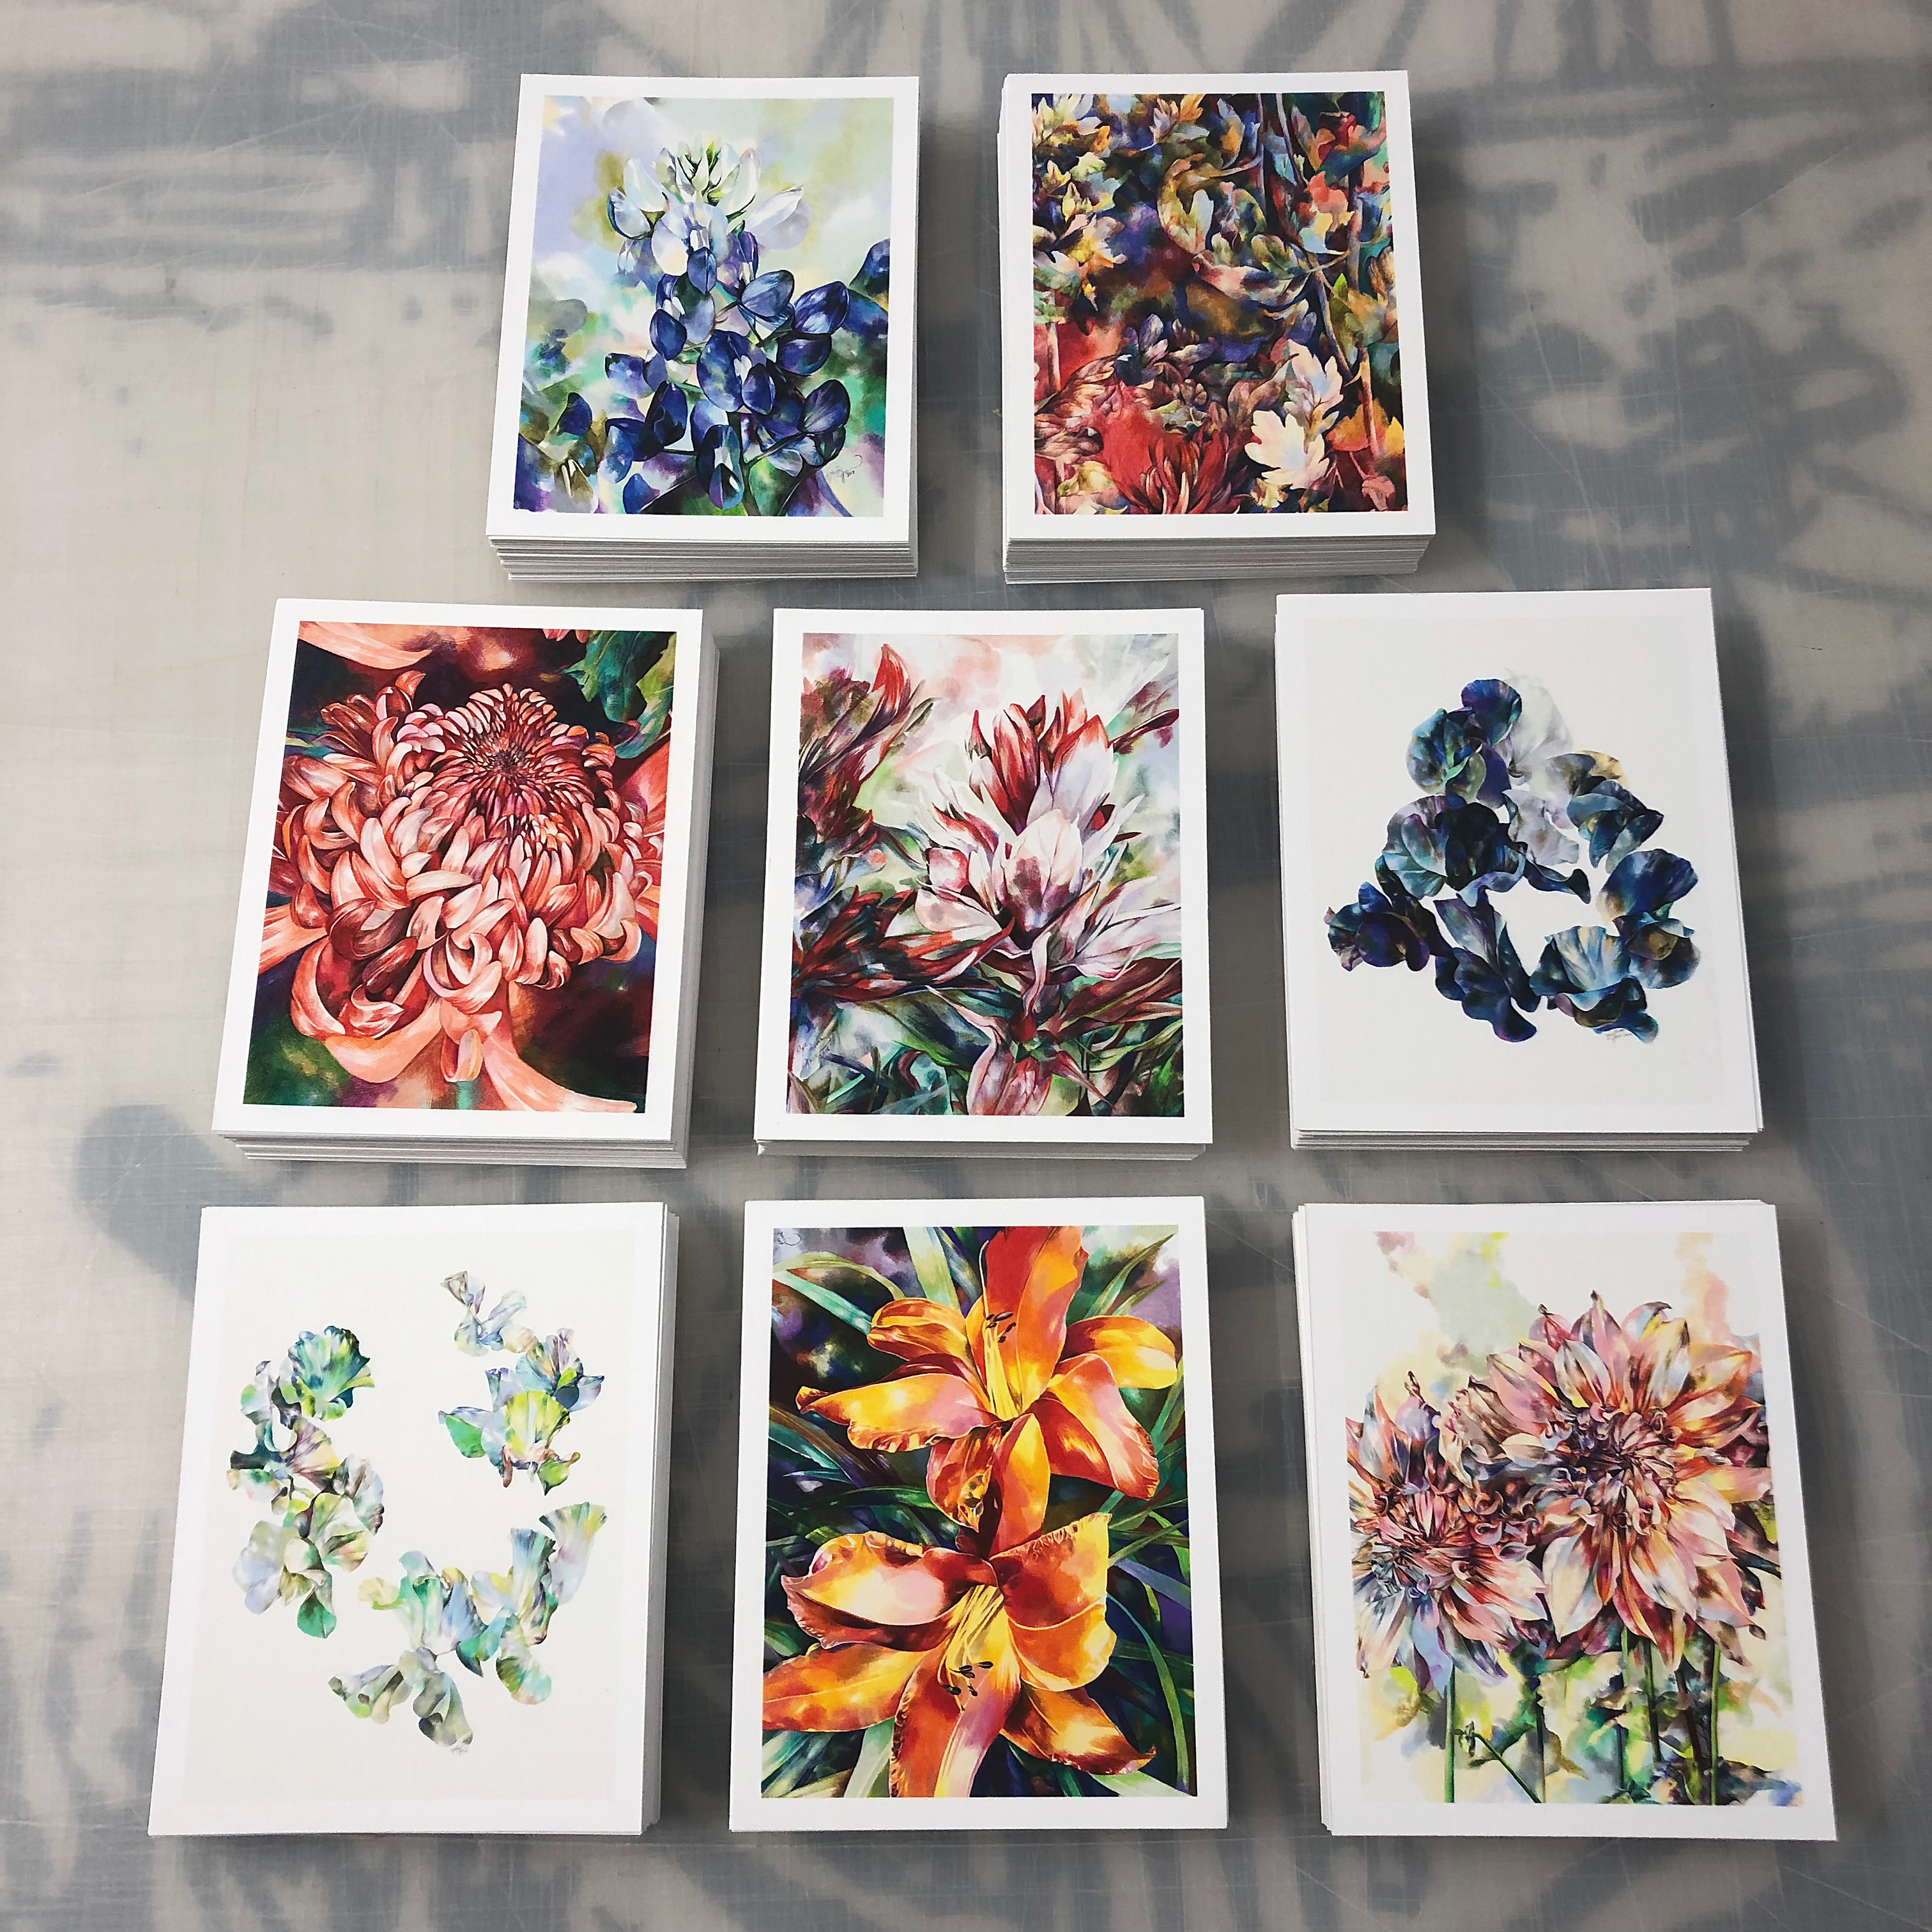 Stacks of card size prints of floral artwork by Virginia artist Zoe Jarvis.